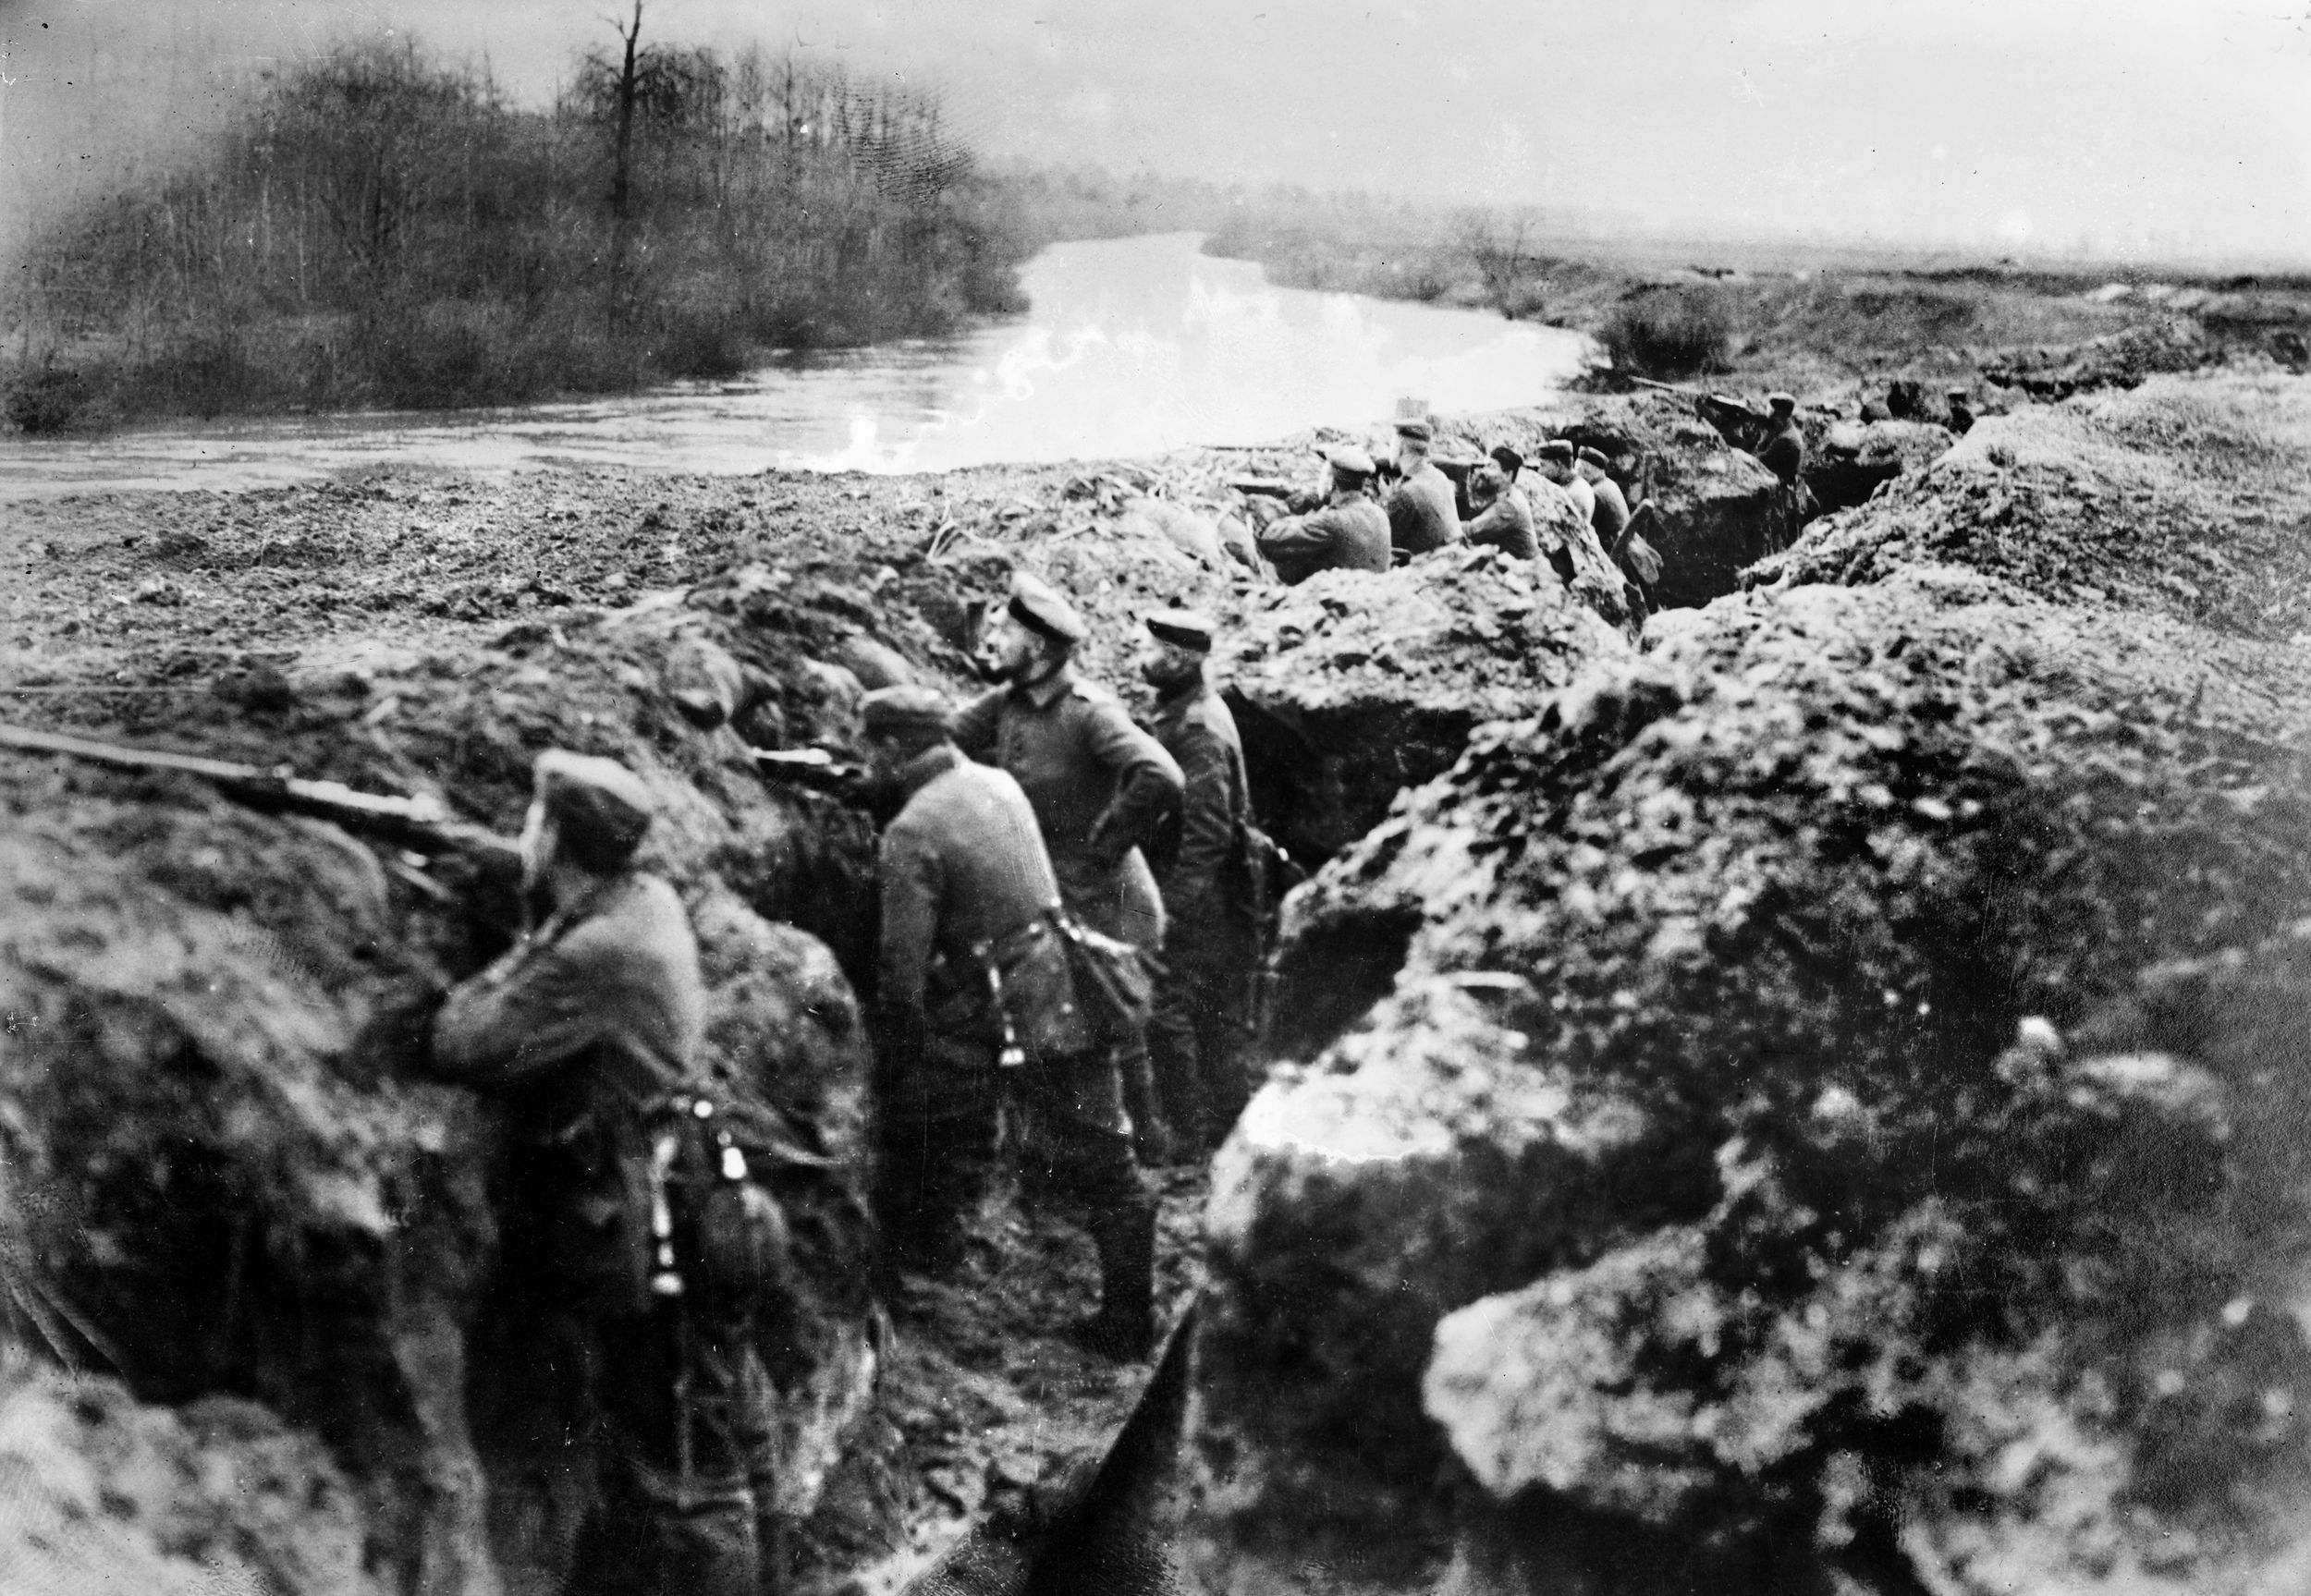 After retreating 190 miles toward Paris, the French army counter attacked on September 5, 1914, near the Marne River.  Defending their homeland, the French, along with a British Expeditionary Force, pushed the Germans back some 40-50 miles over the Aisne River.  The German plan to win the war in 40 days by occupying Paris and destroying the French and British armies had failed.  Along the north bank of the Aisne, the Germans dug in, beginning the trench warfare that would dominate the conflict for the next three years.